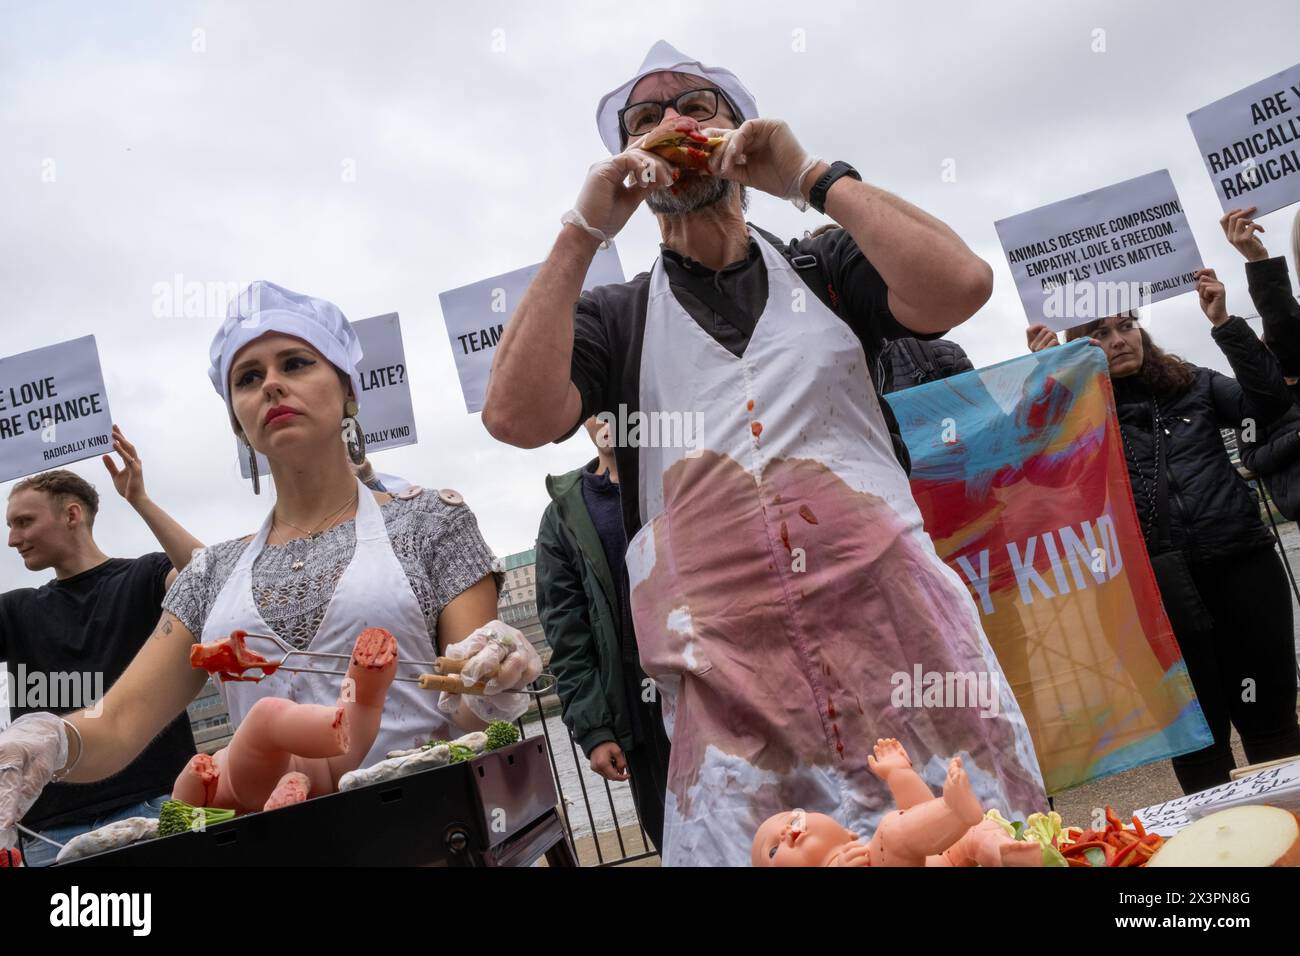 A vegan demonstrator pretends to eat a burger made of Human meat during the rally. Vegan group Radically Kind held a demonstration at the Tate Modern on the South Bank of the Thames. By showing graphic images they hope to convert meat eaters to veganism. Stock Photo